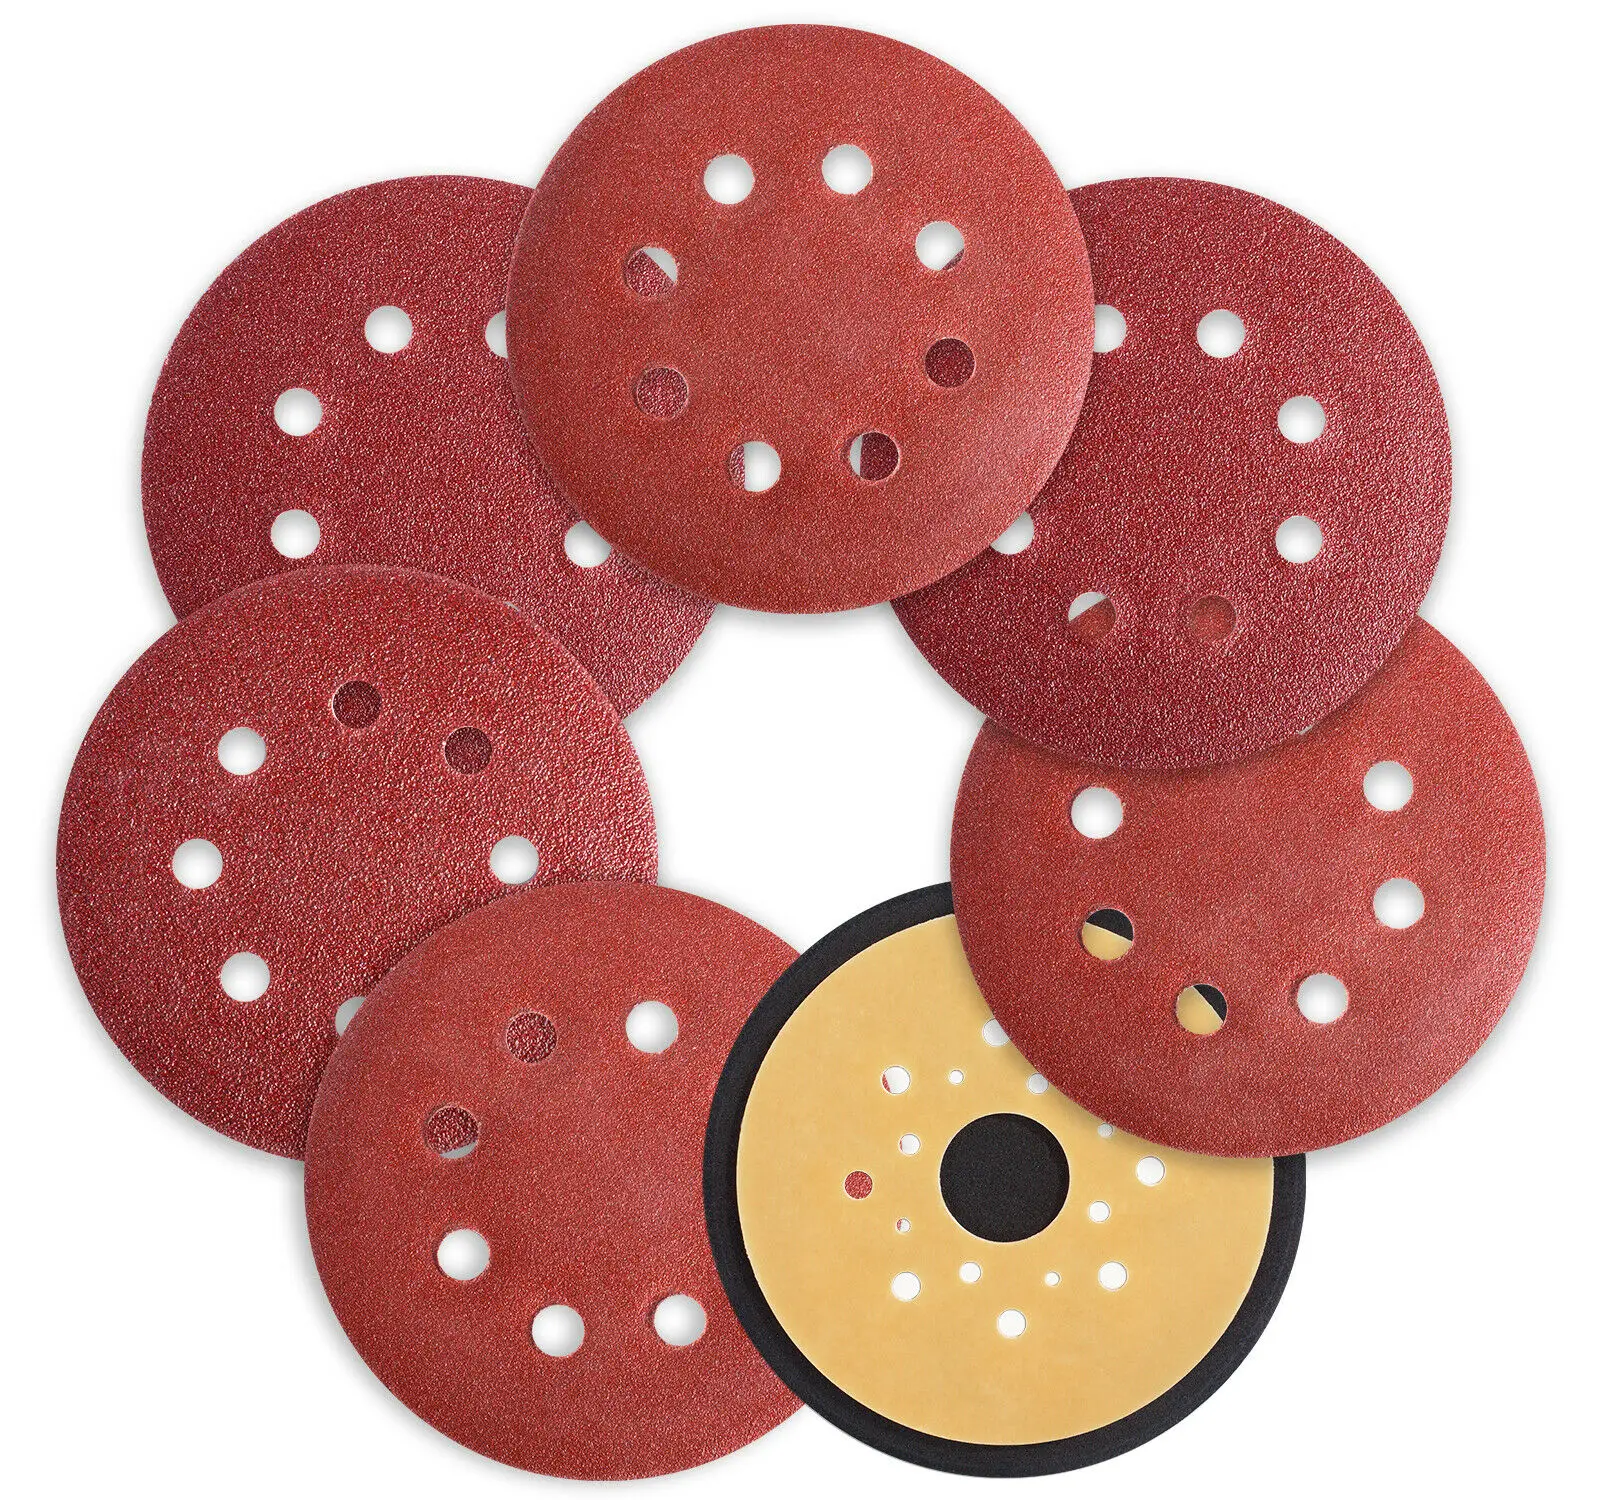 70PCS 5 Inch Hook and Loop Sanding Discs with Sander Pad Fits to Black & Decker